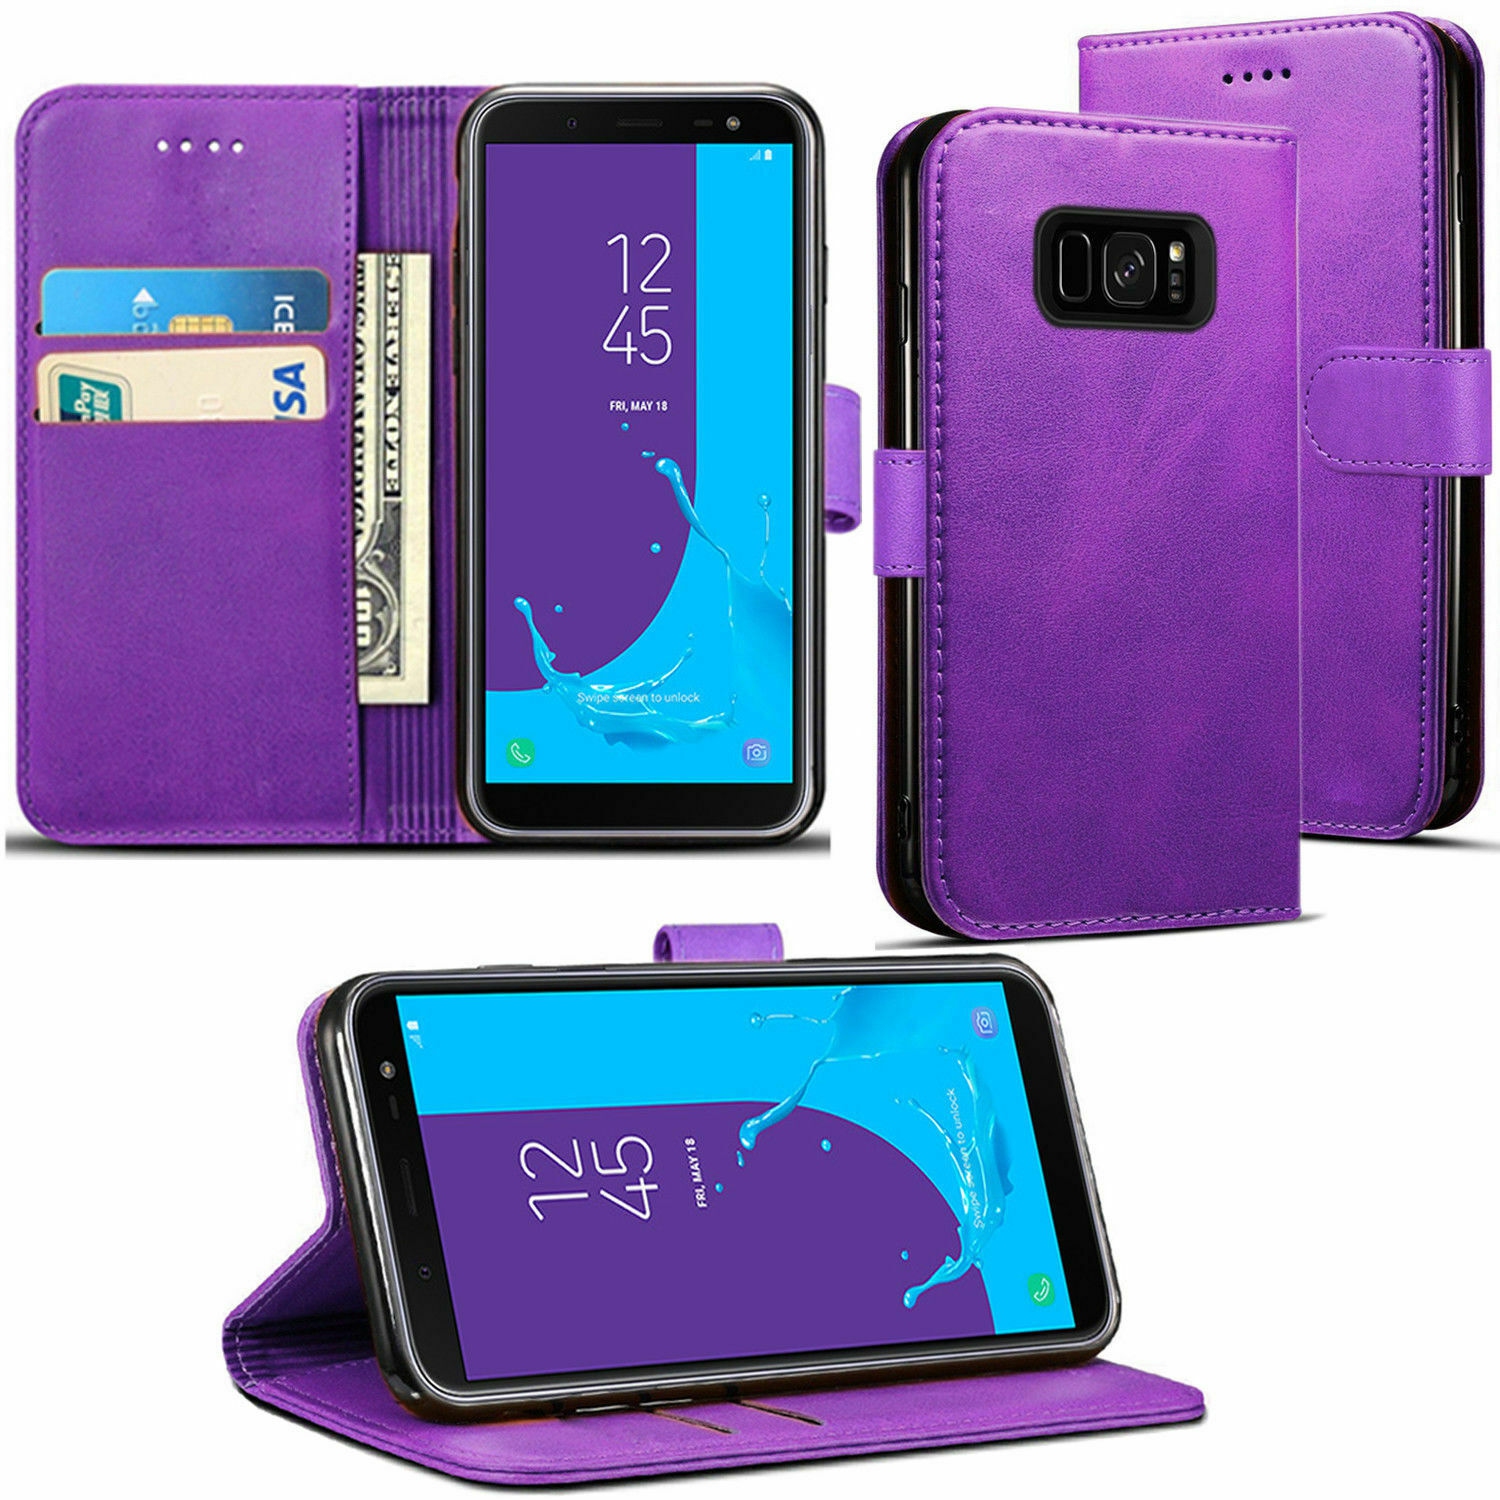 【CSmart】 Magnetic Card Slot Leather Folio Wallet Flip Case Cover for Samsung Galaxy S8 Plus, Purple